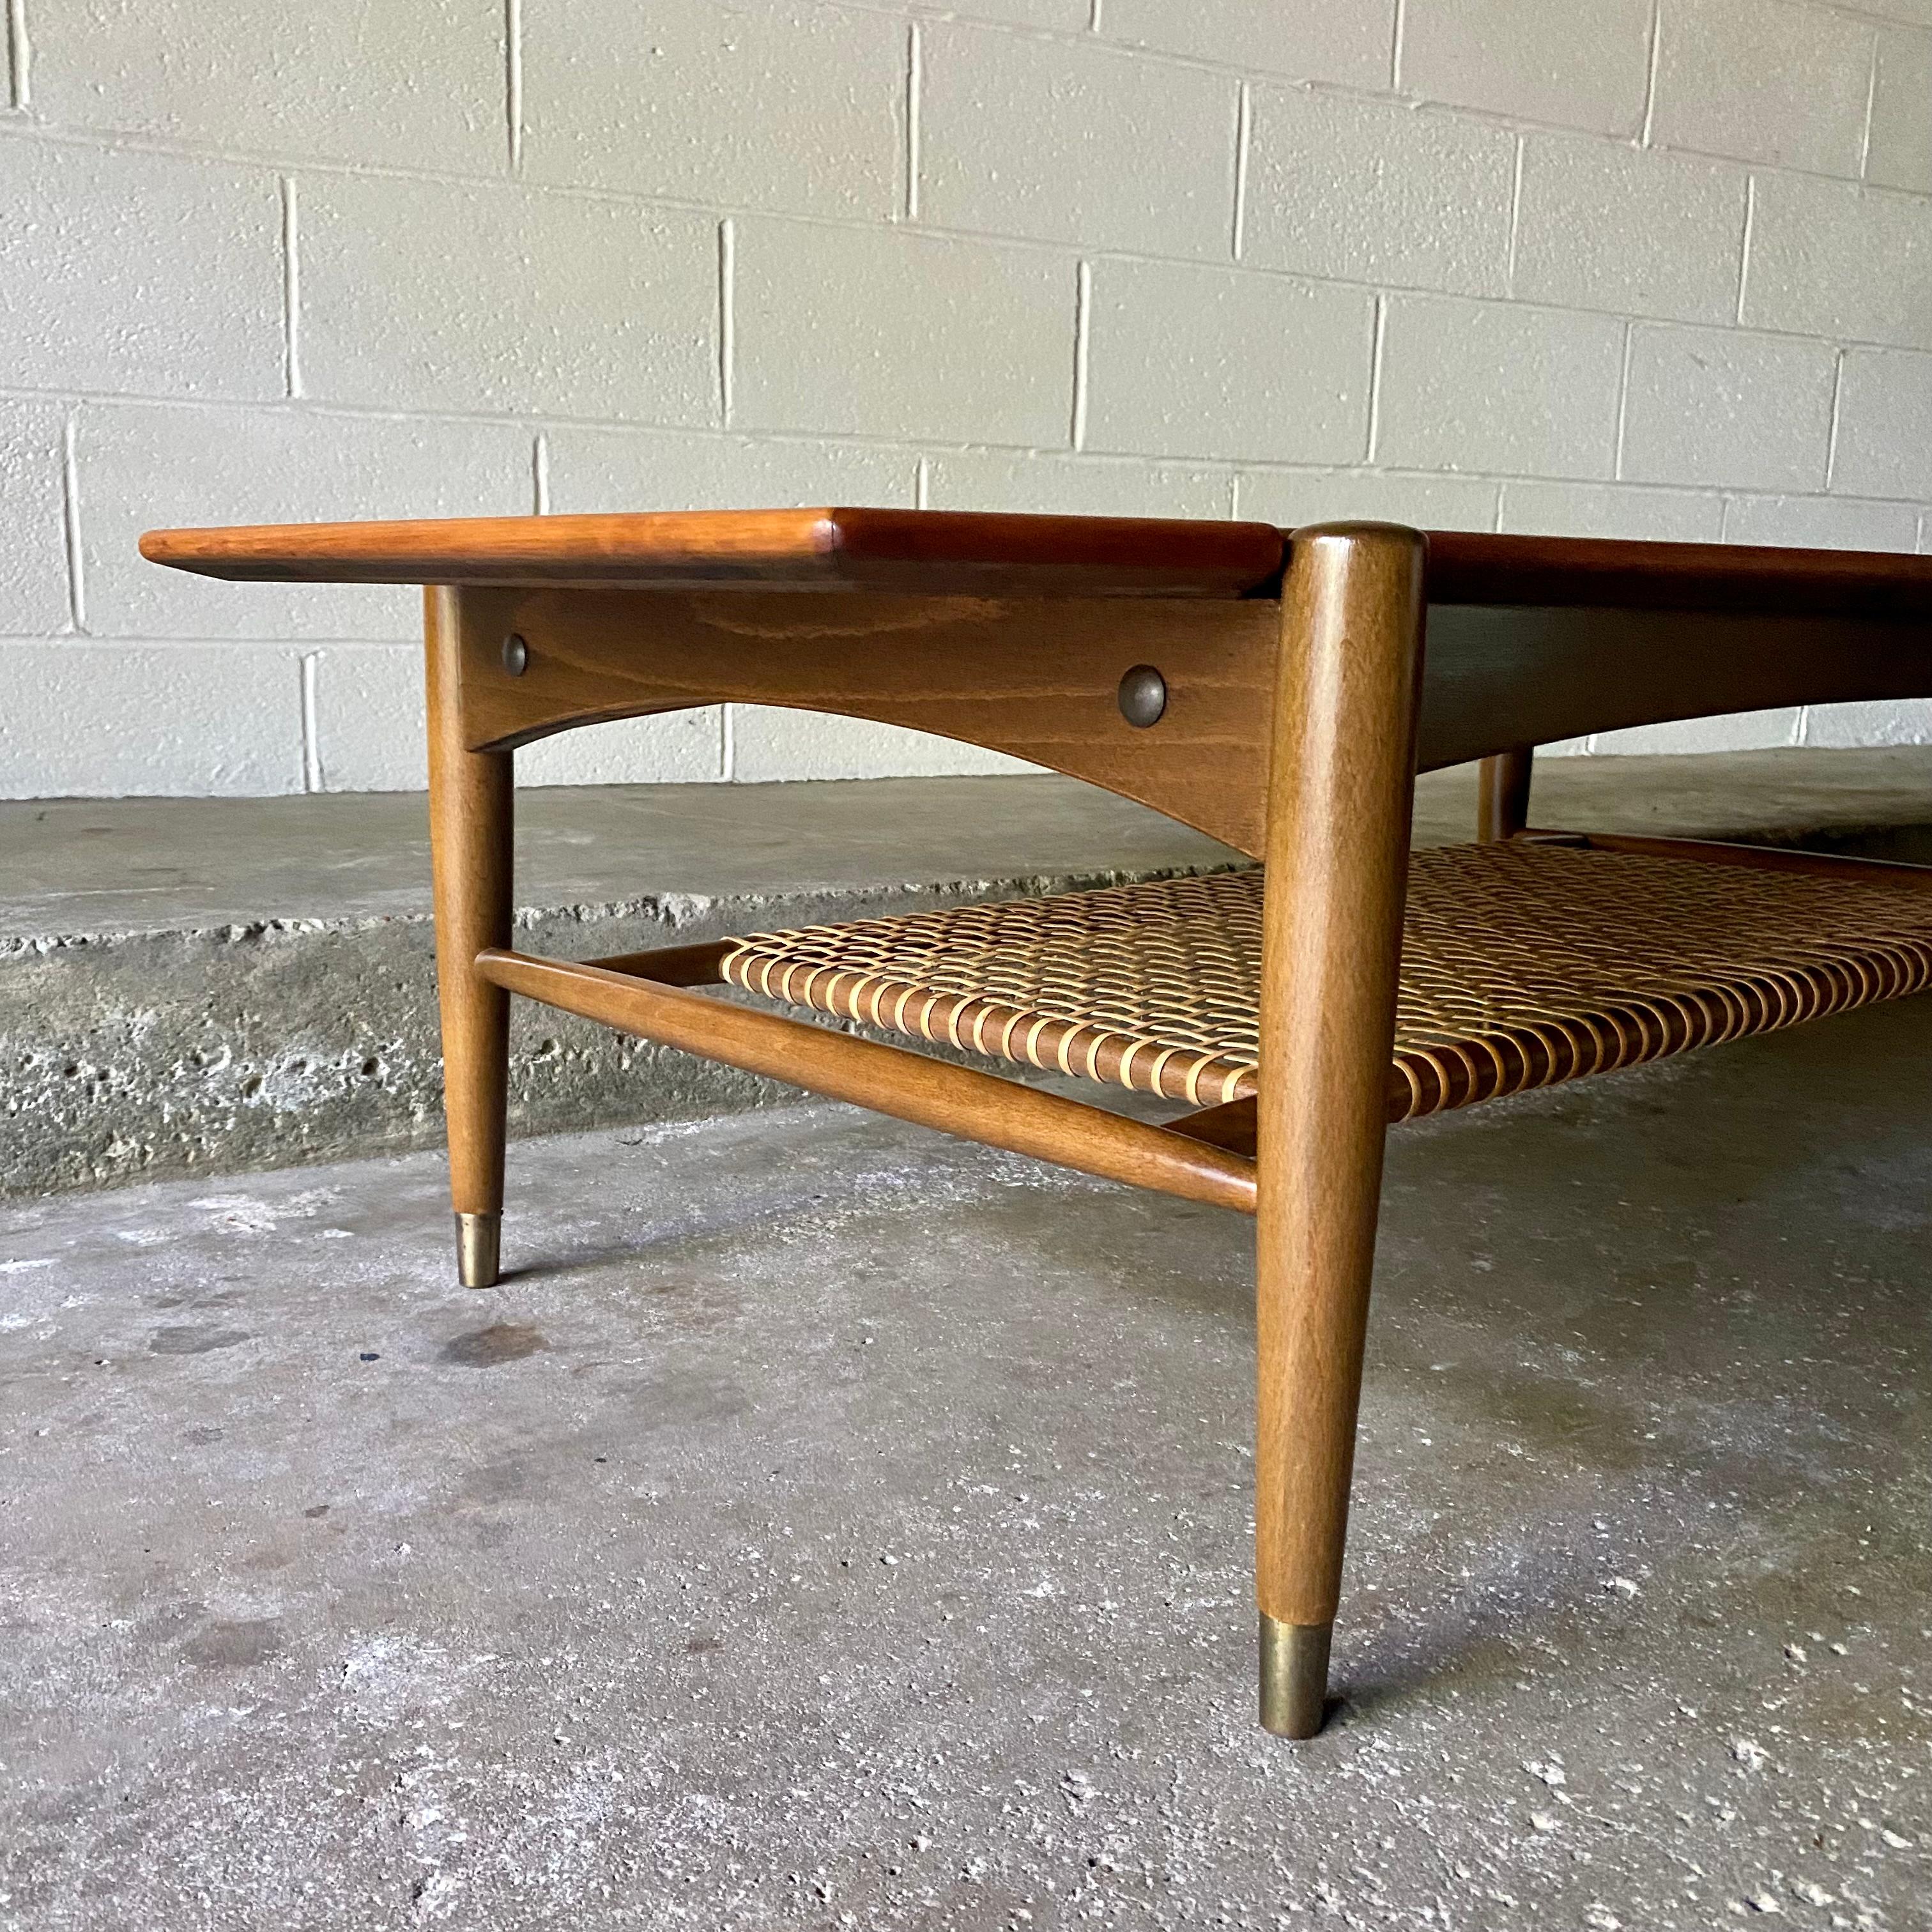 This is an excellent Danish modern coffee table designed by Folke Ohlsson for Dux of Sweden in the 1960’s. It features beautiful sculpted beech wood with a teak wood veneer top, original cane, and brass detail. It’s subtle yet impressive, large yet